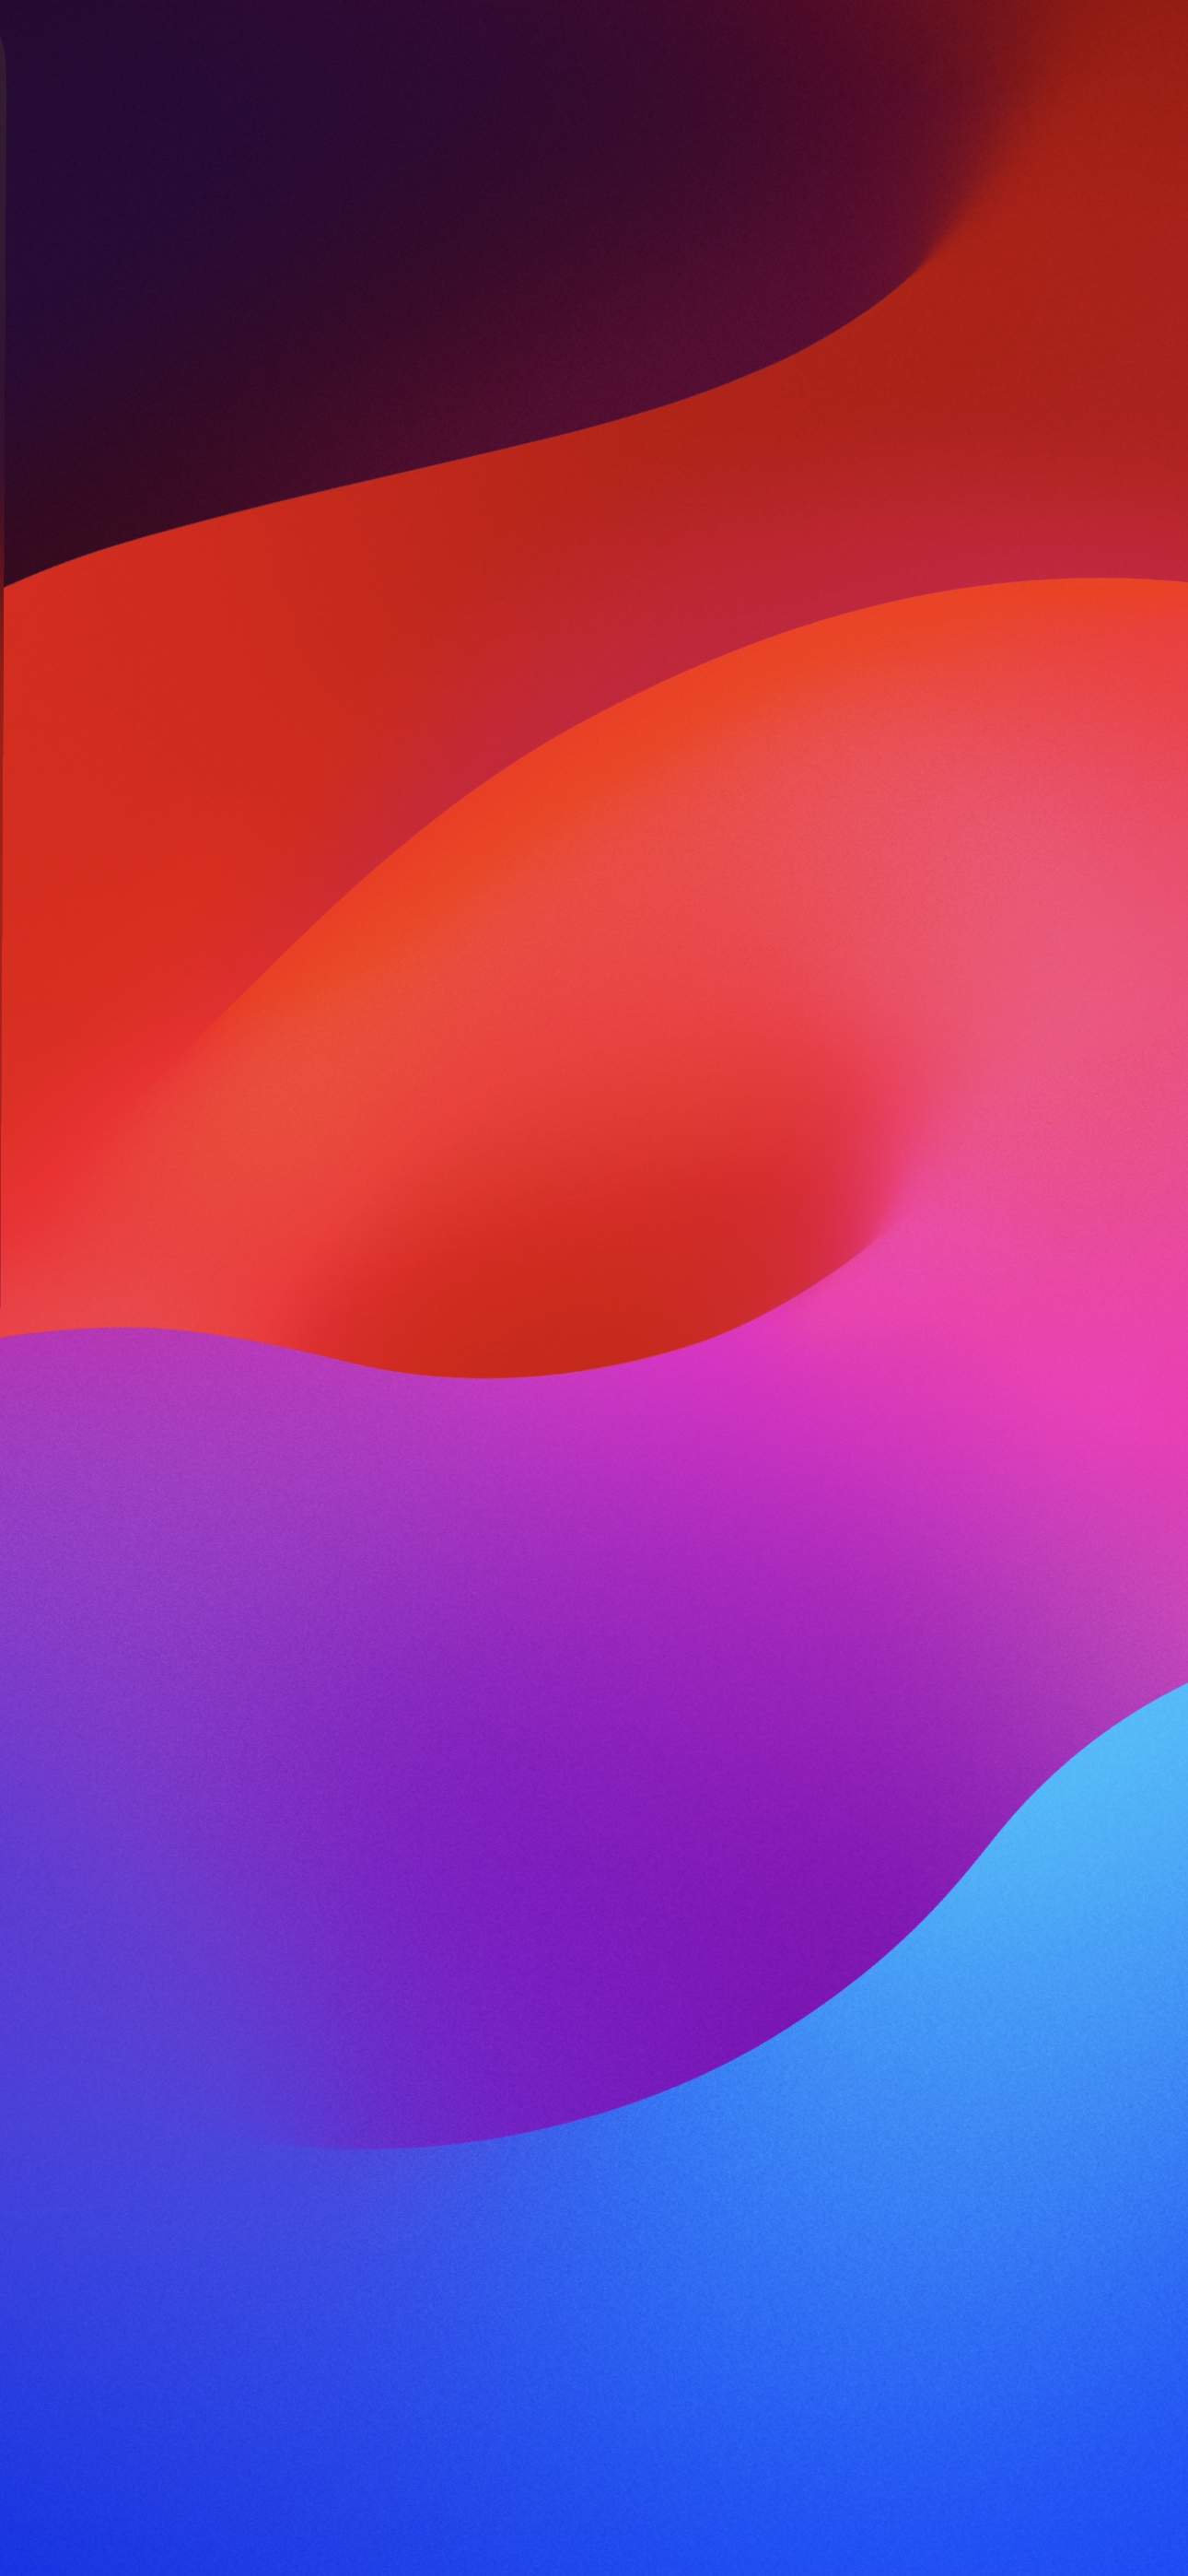 Download the Official iOS 17 Wallpaper for iPhone - iClarified